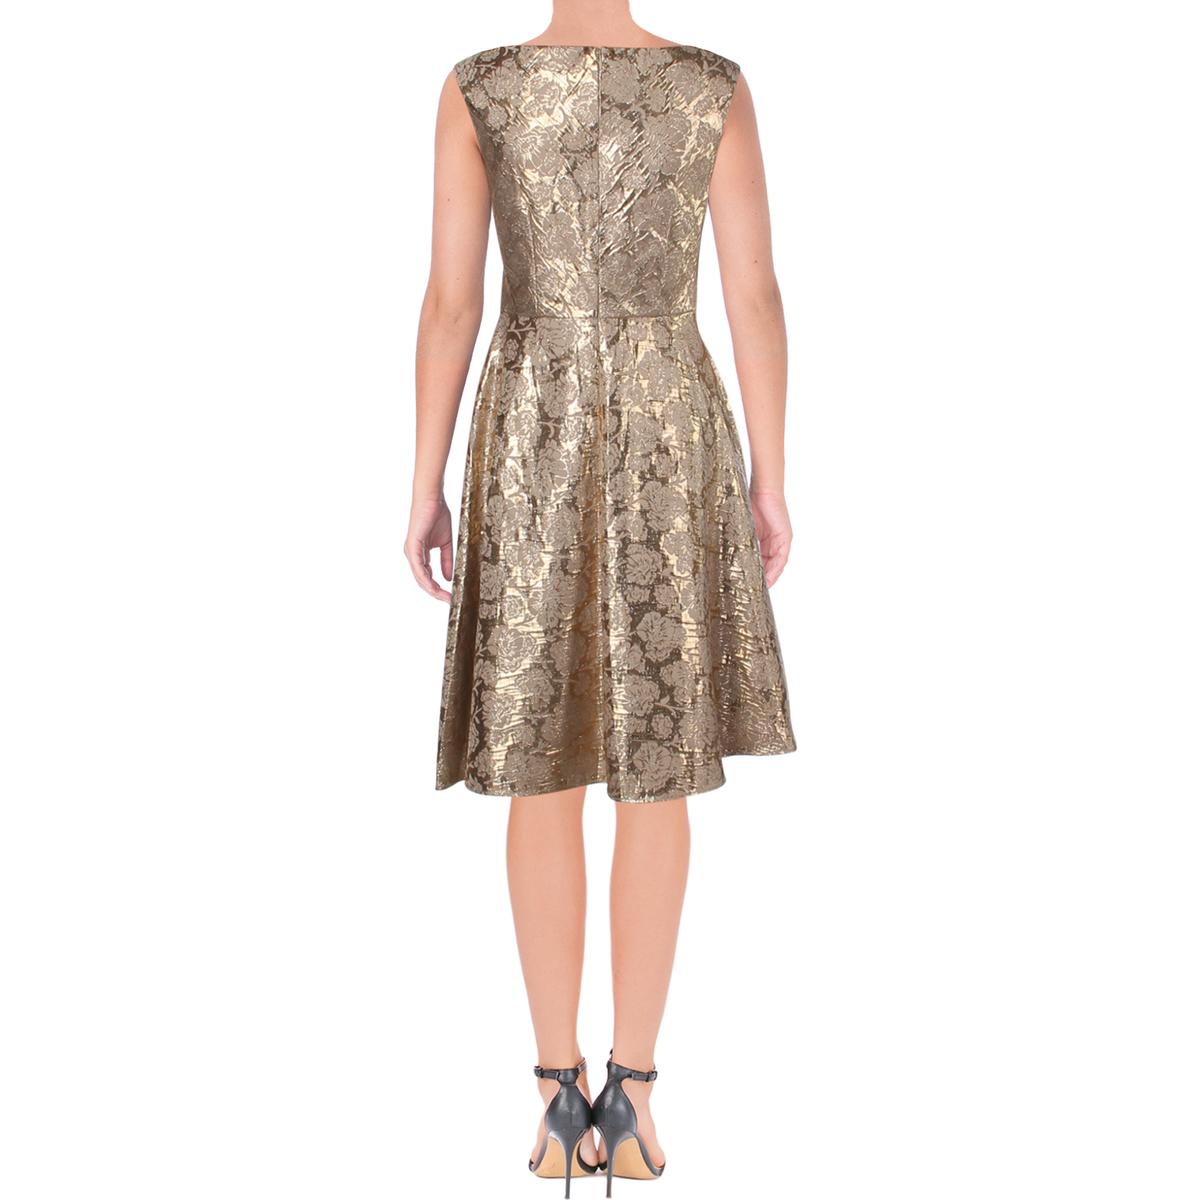 Kay Unger Womens Gold Metallic Floral Party Cocktail Dress 12 BHFO 4121 ...